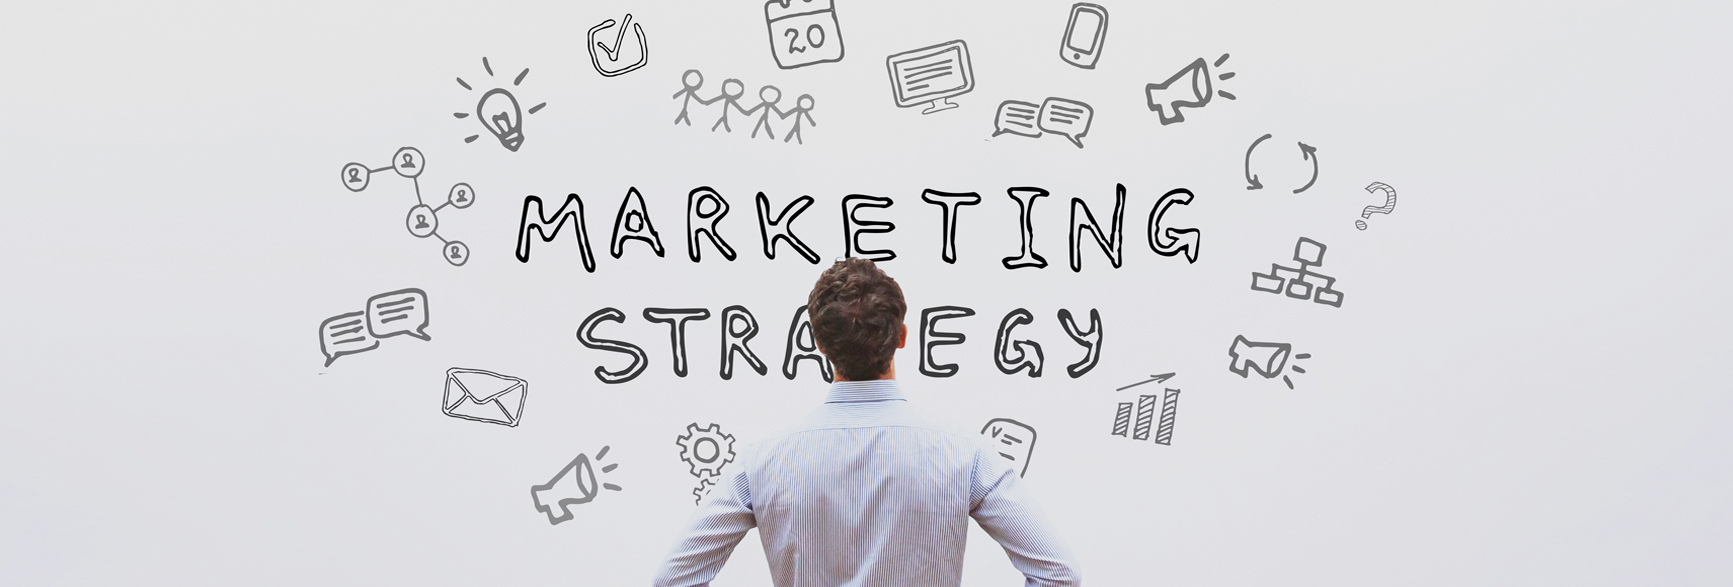 5 basic laws of marketing we should all be following